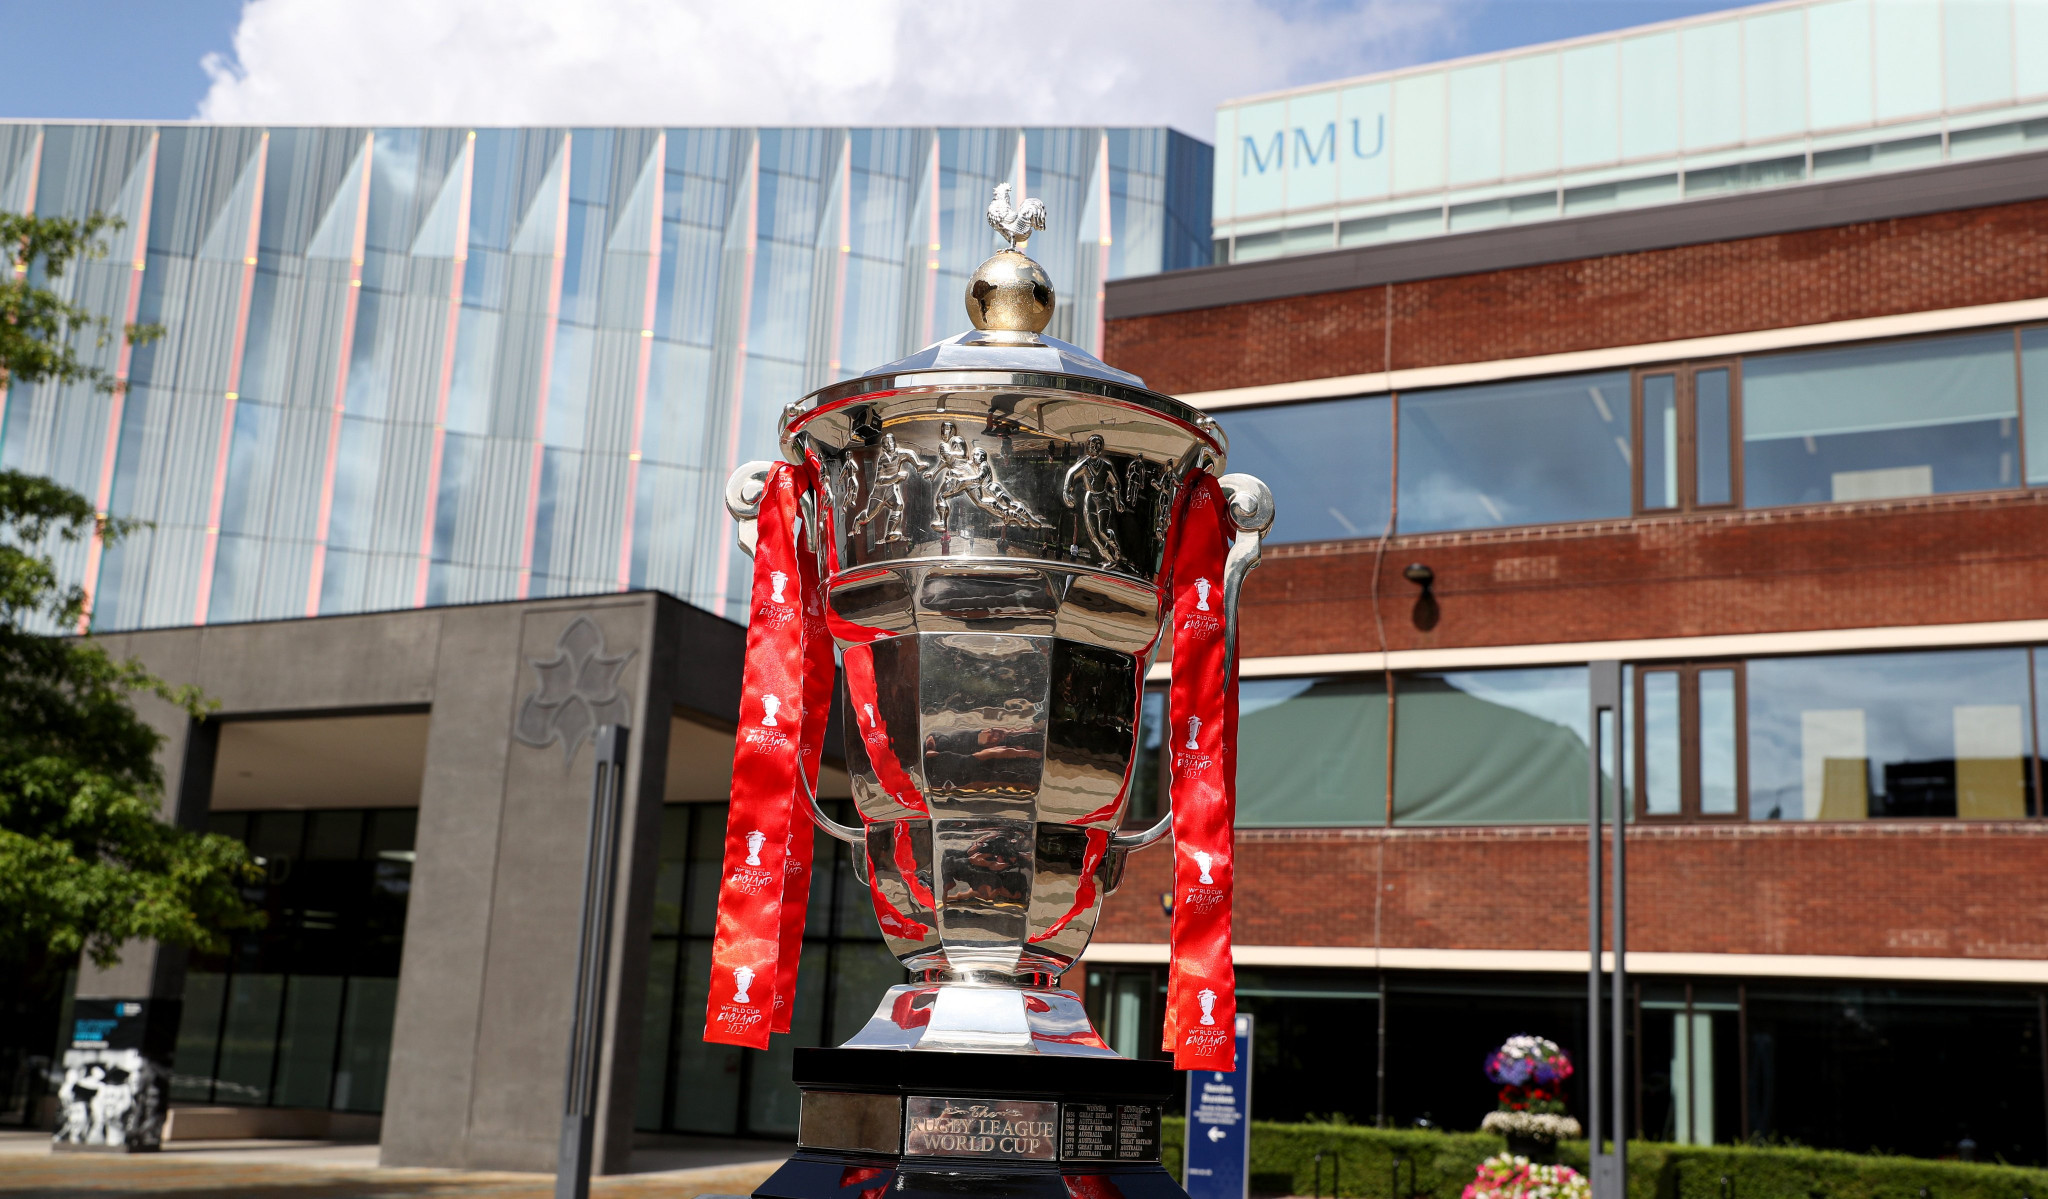 Rugby League World Cup organisers announce procurement experts as official supplier for 2021 tournament